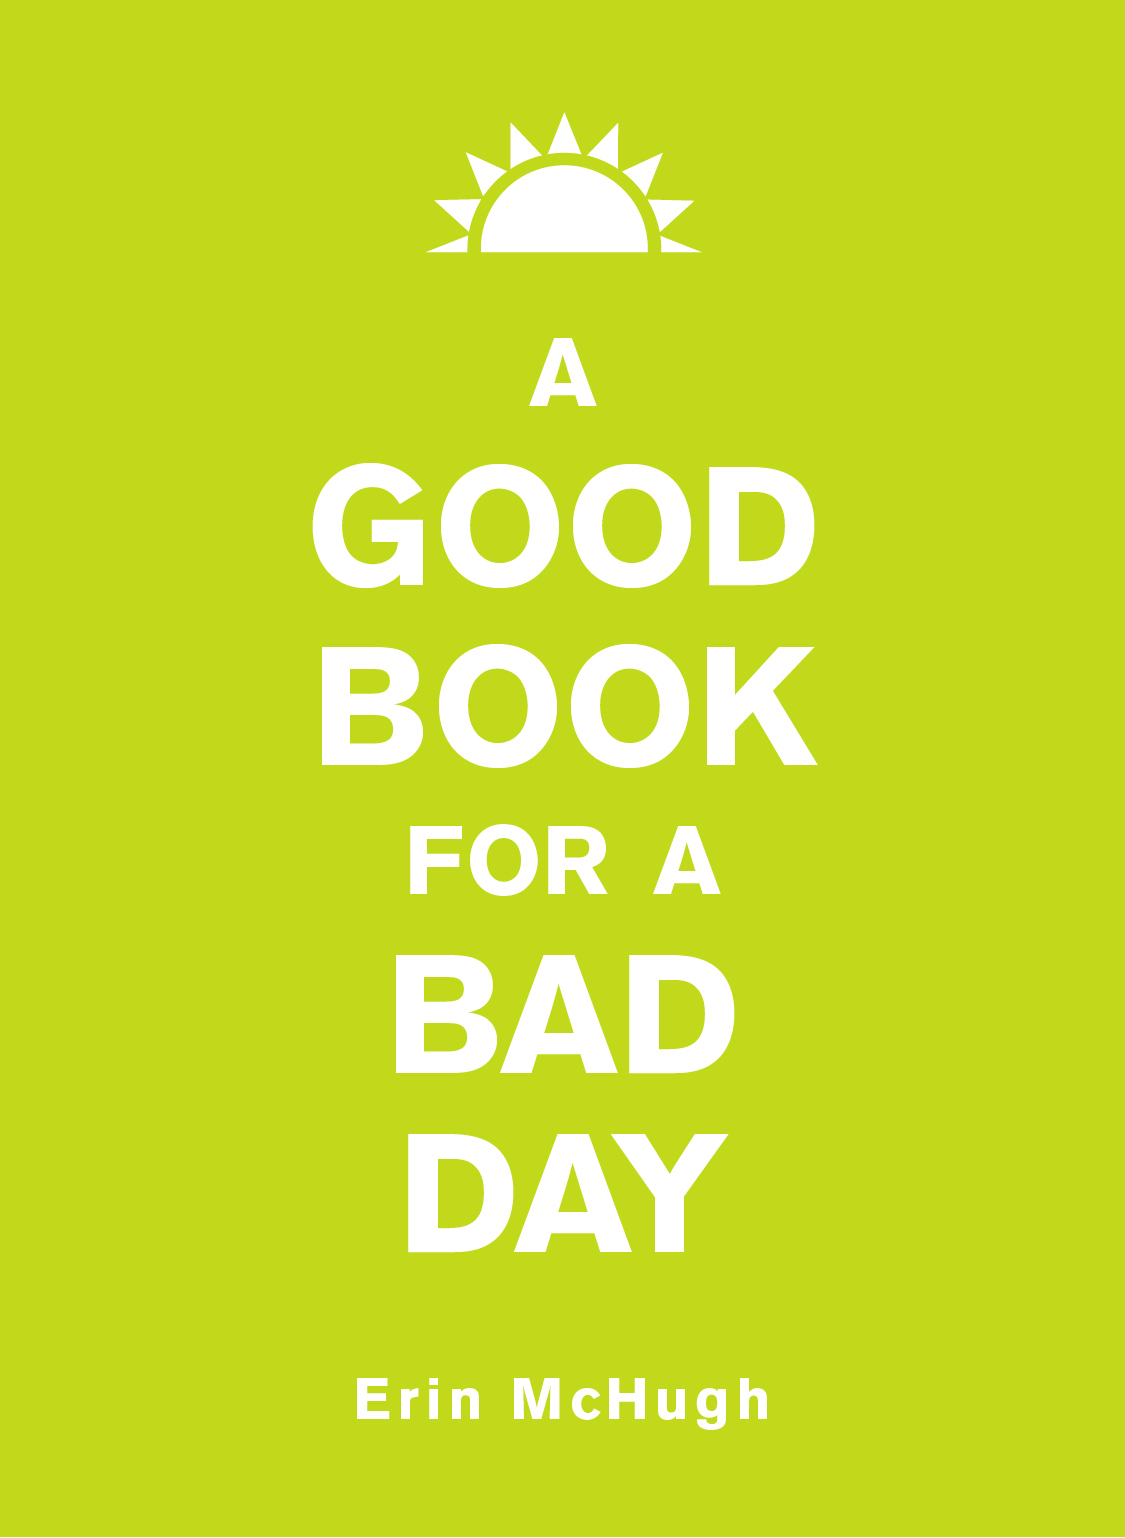 A Good Book for a Bad Day copyright 2015 by Erin McHugh All rights reserved - photo 1